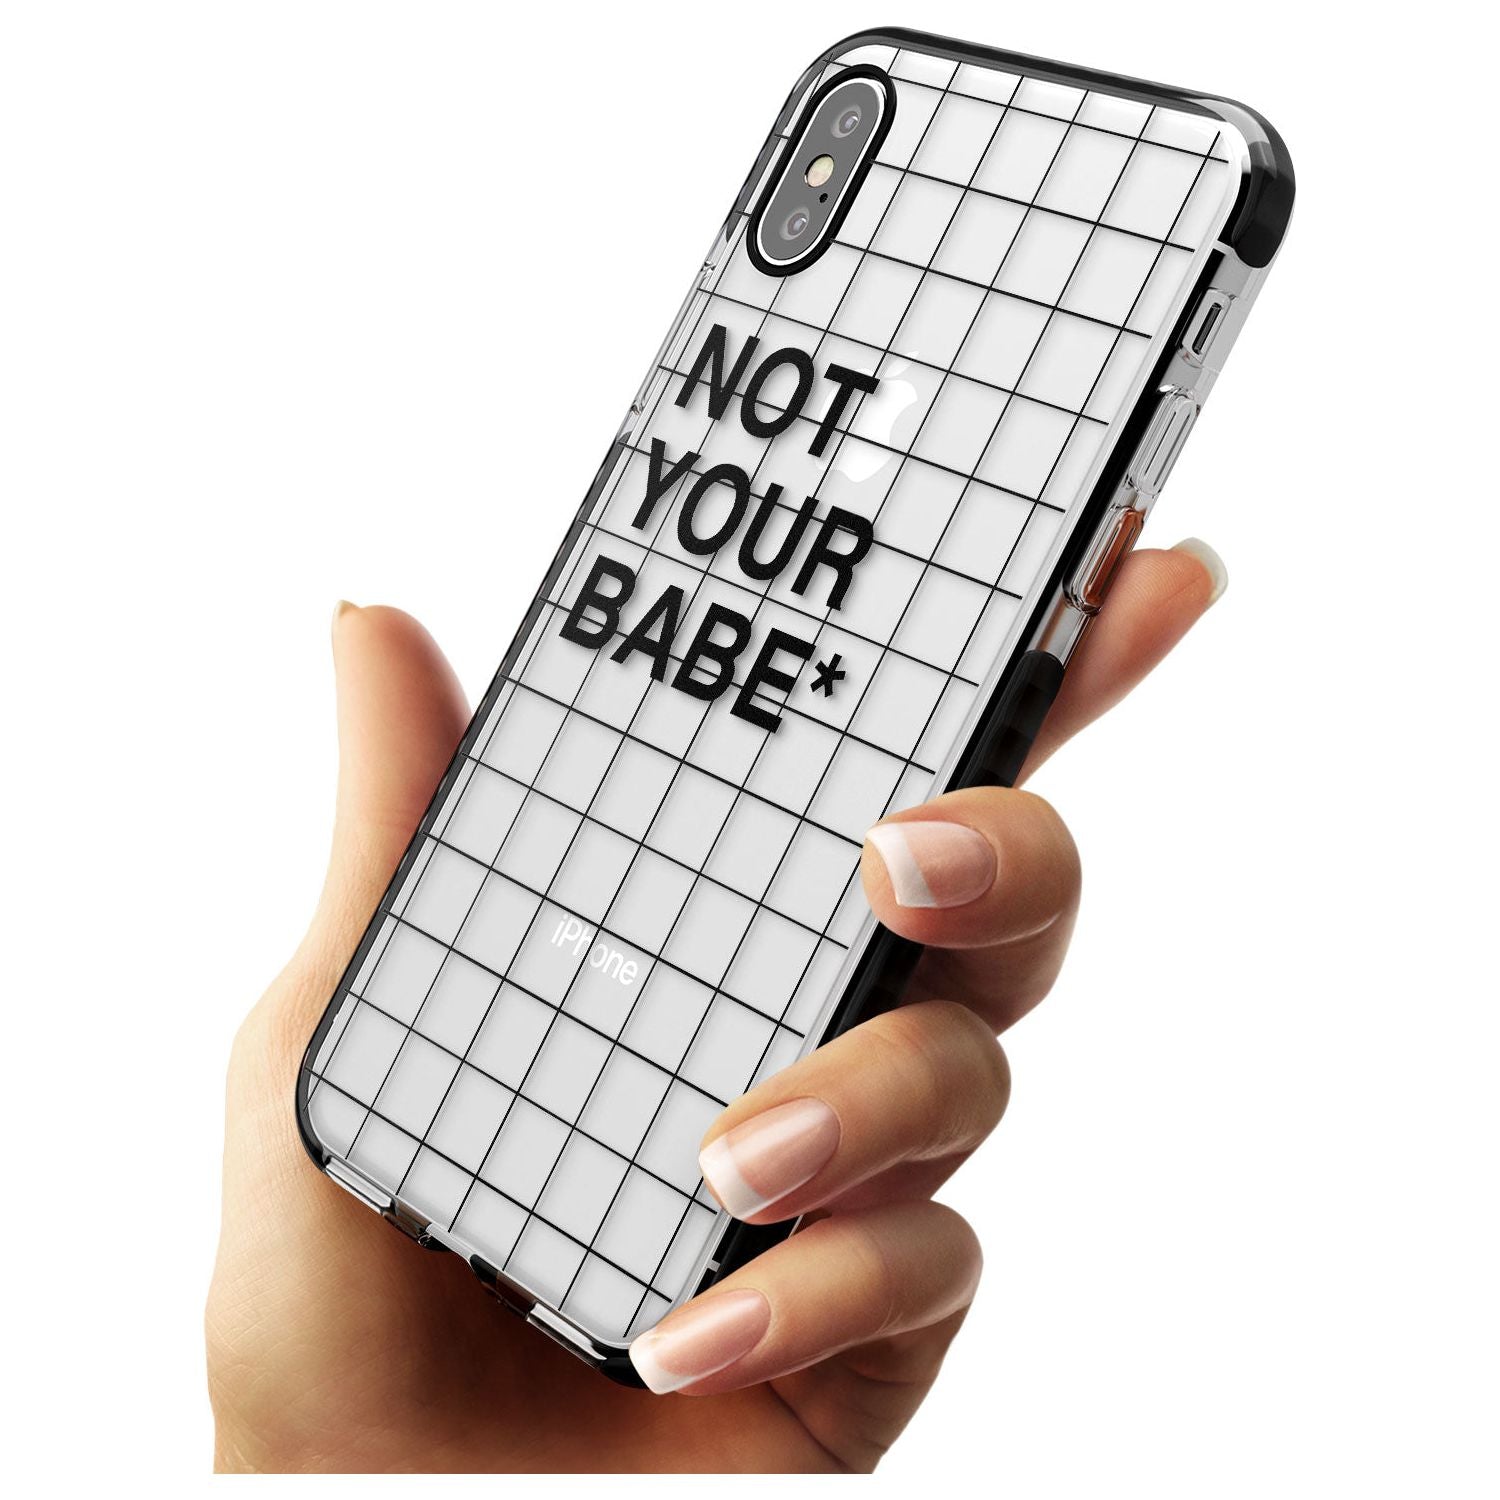 Grid Pattern Not Your Babe Black Impact Phone Case for iPhone X XS Max XR